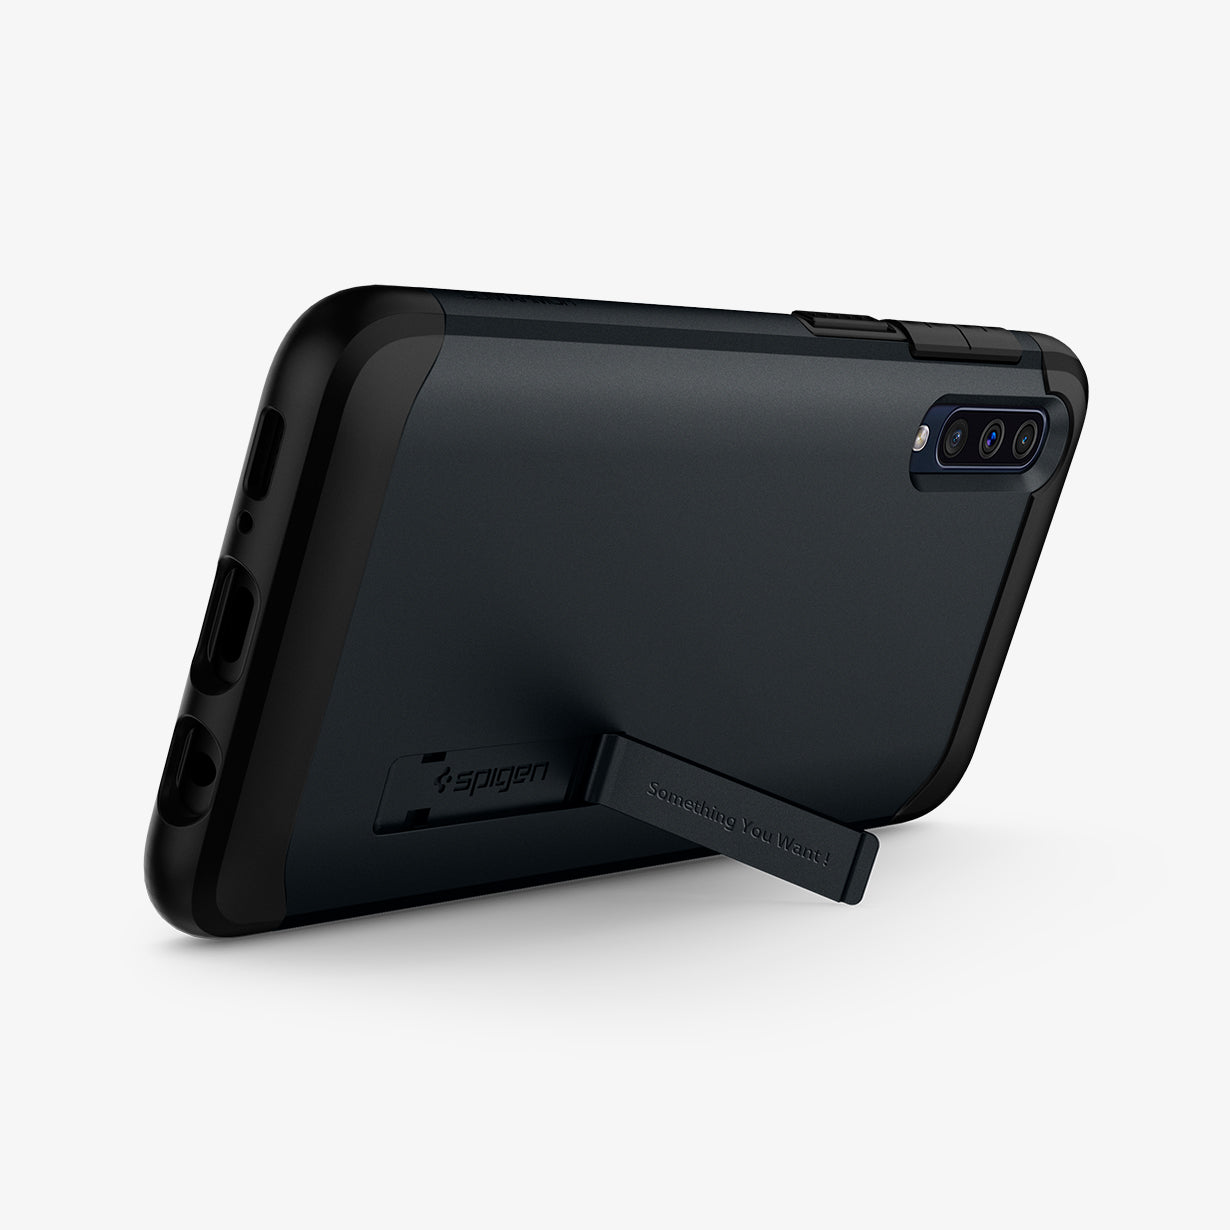 611CS26021 - Galaxy A50 Case Slim Armor in Metal Slate showing the back, partial side and bottom with a built-in kickstand propped up